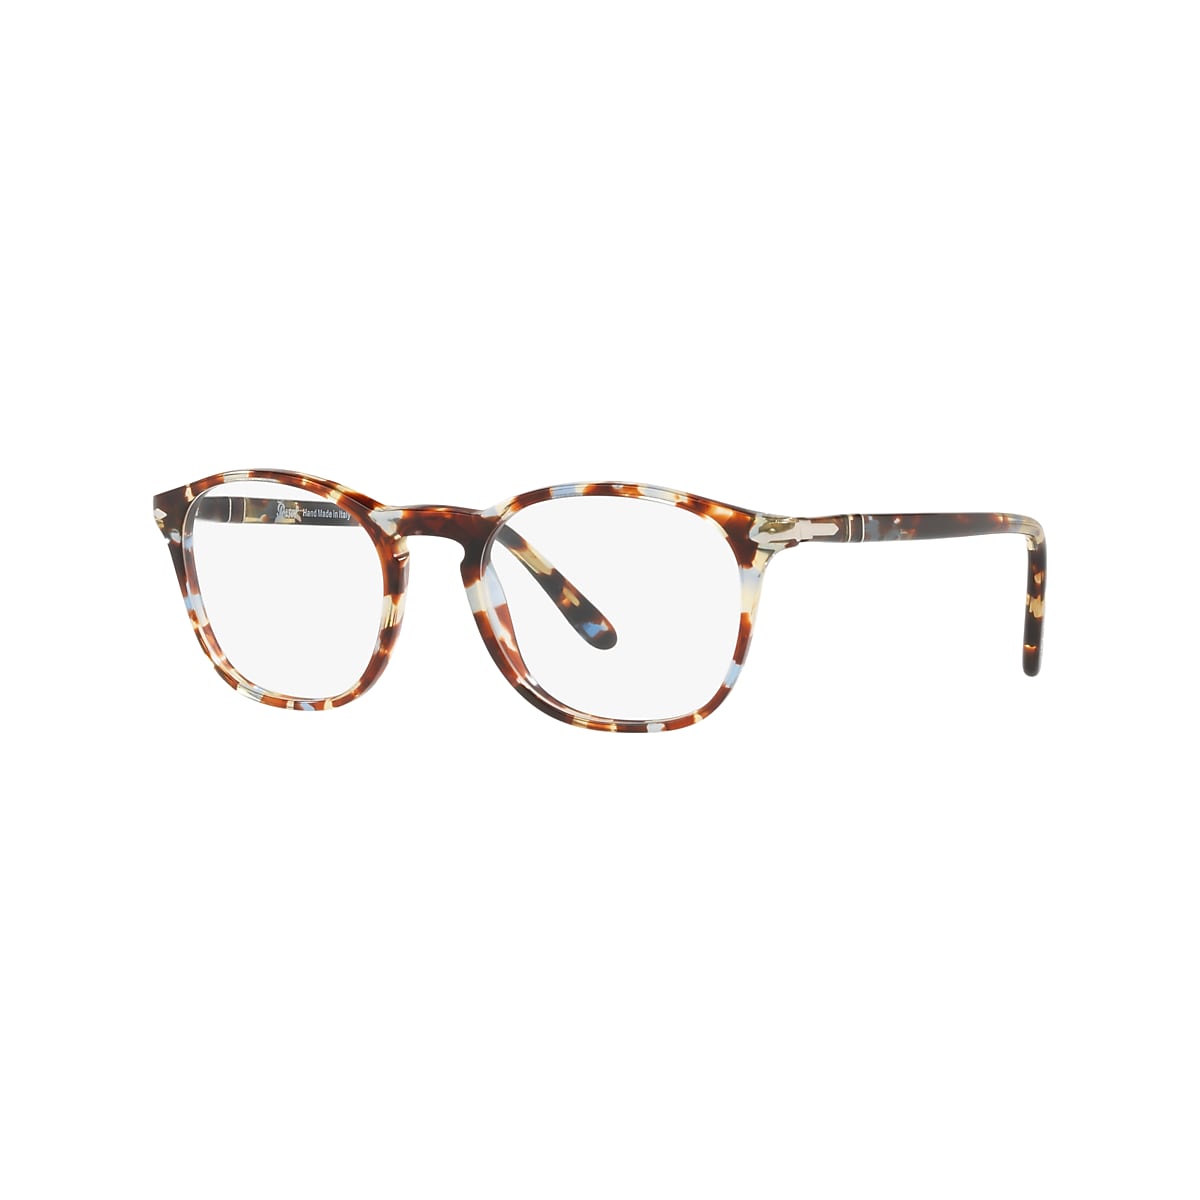 https://assets.persol.com/is/image/Persol/8053672837704_030A.png?impolicy=SEO_1x1